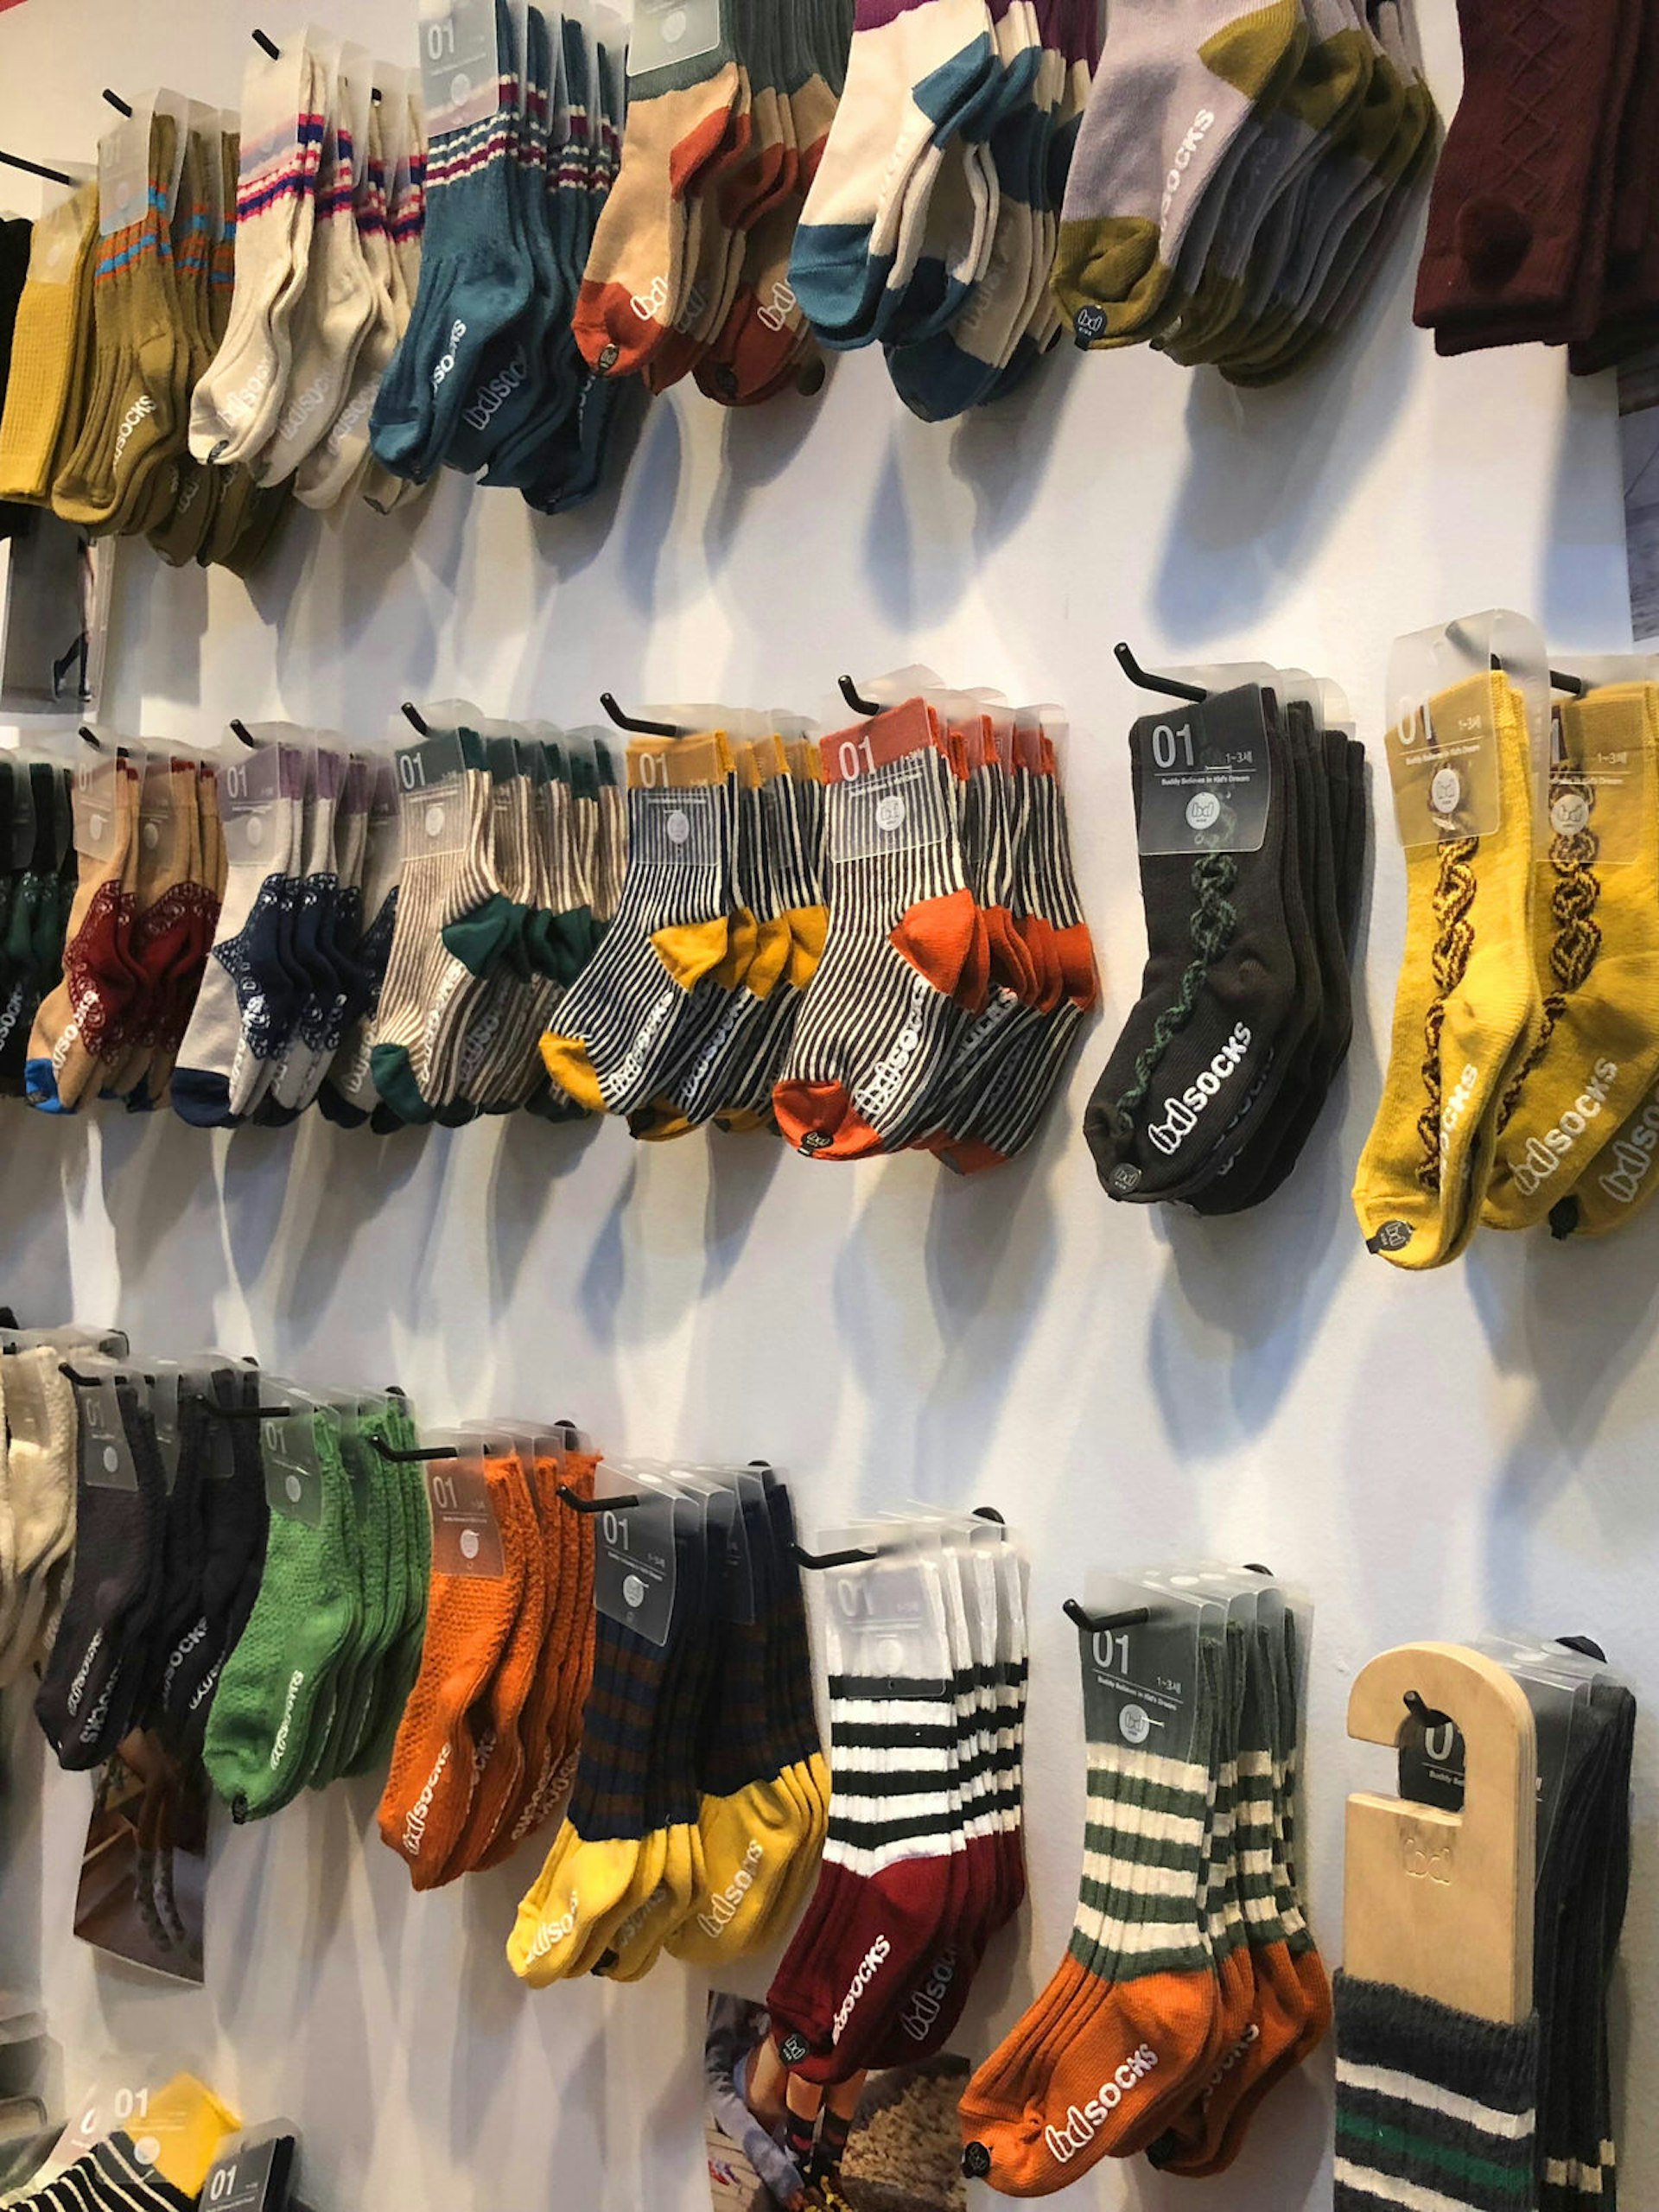 Several racks of socks in yellow and grey, orange, and muted tones and stripes